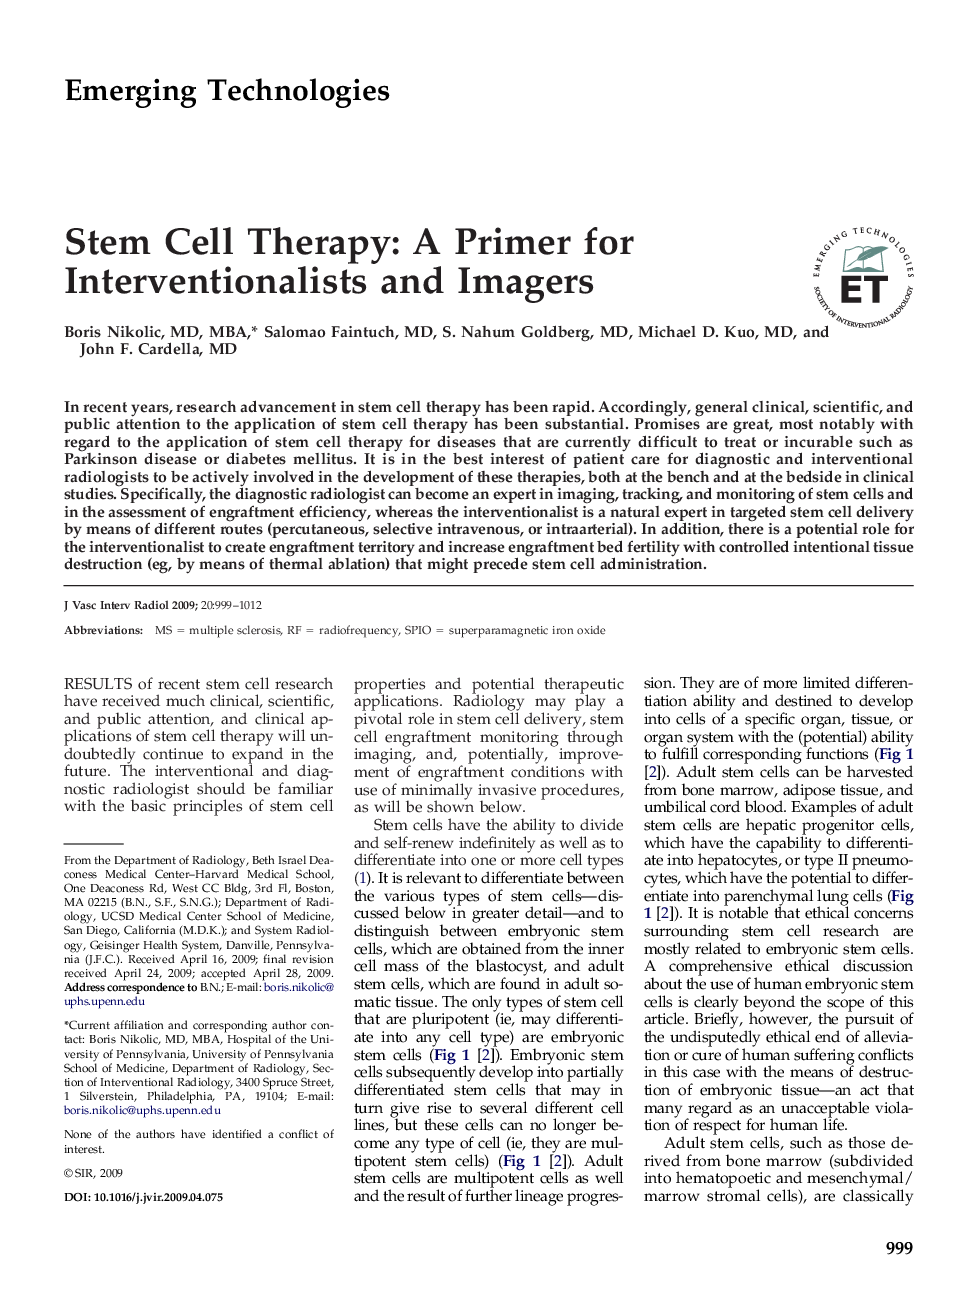 Stem Cell Therapy: A Primer for Interventionalists and Imagers